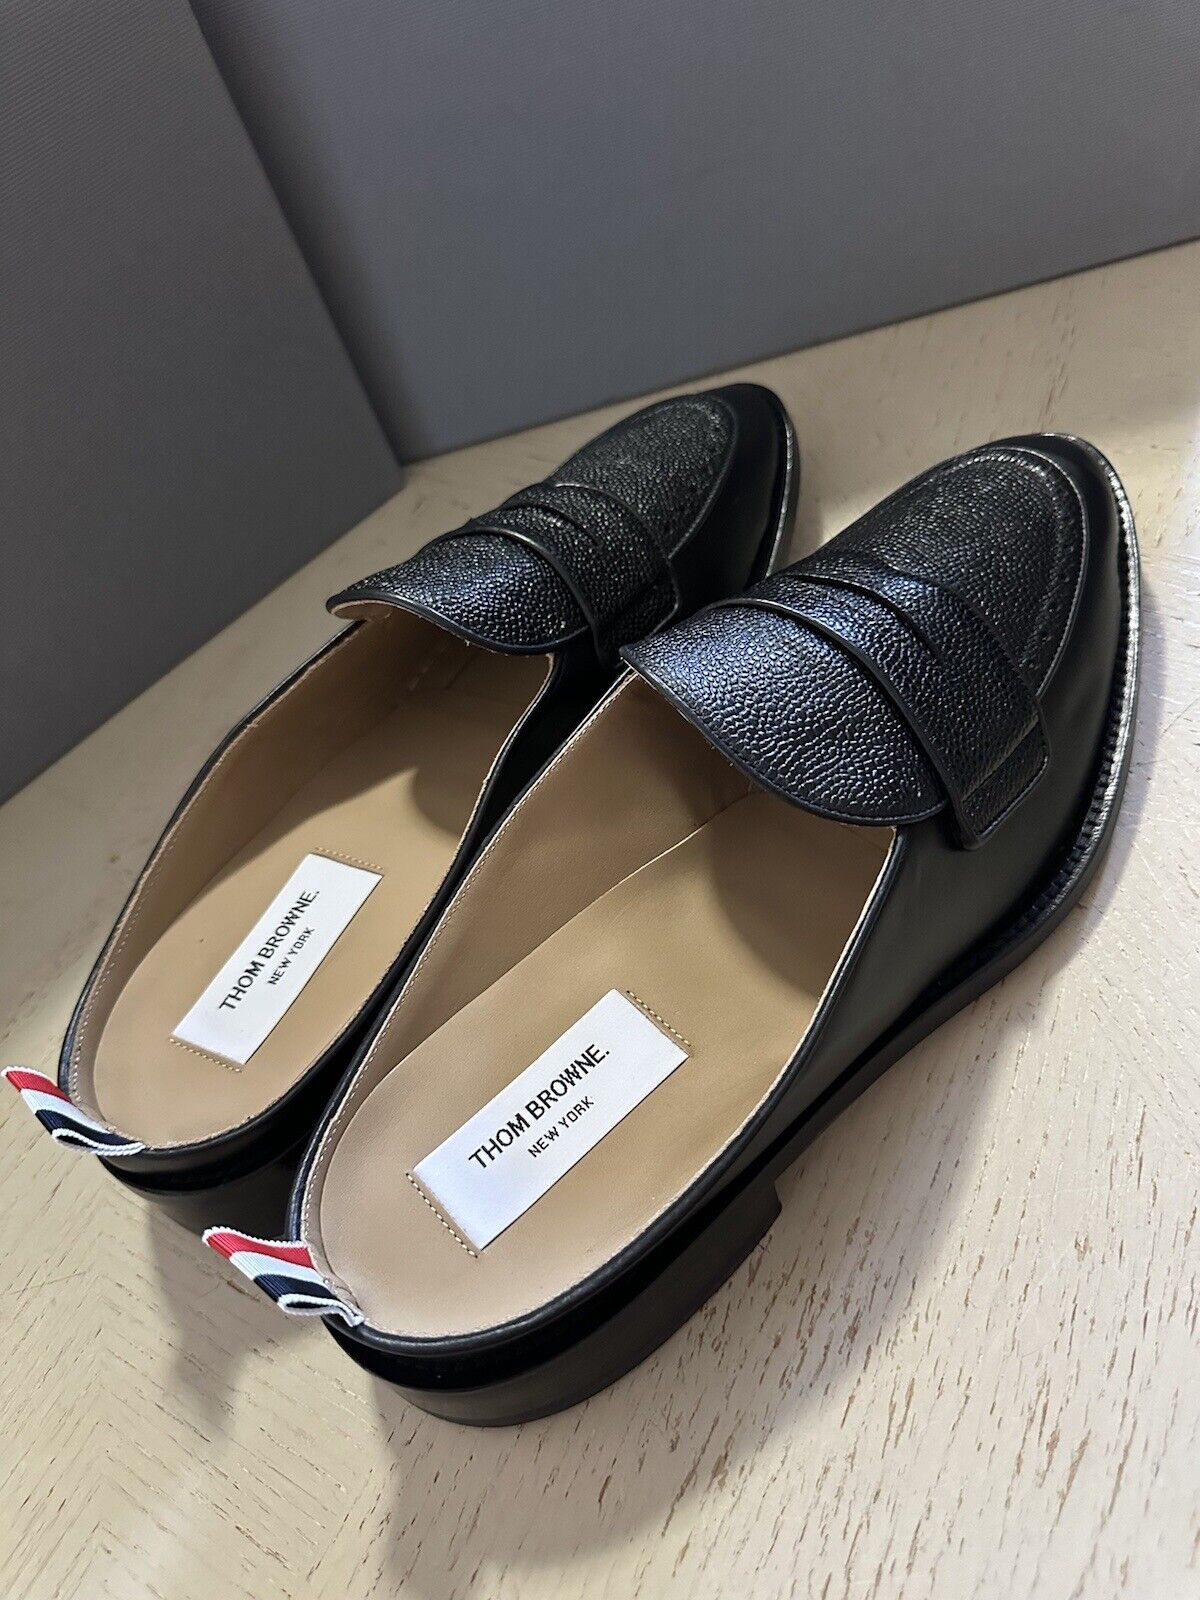 NIB Thom Browne Men Leather Penny Loafers Sandal Shoes Black 11 US / 44 EU Italy